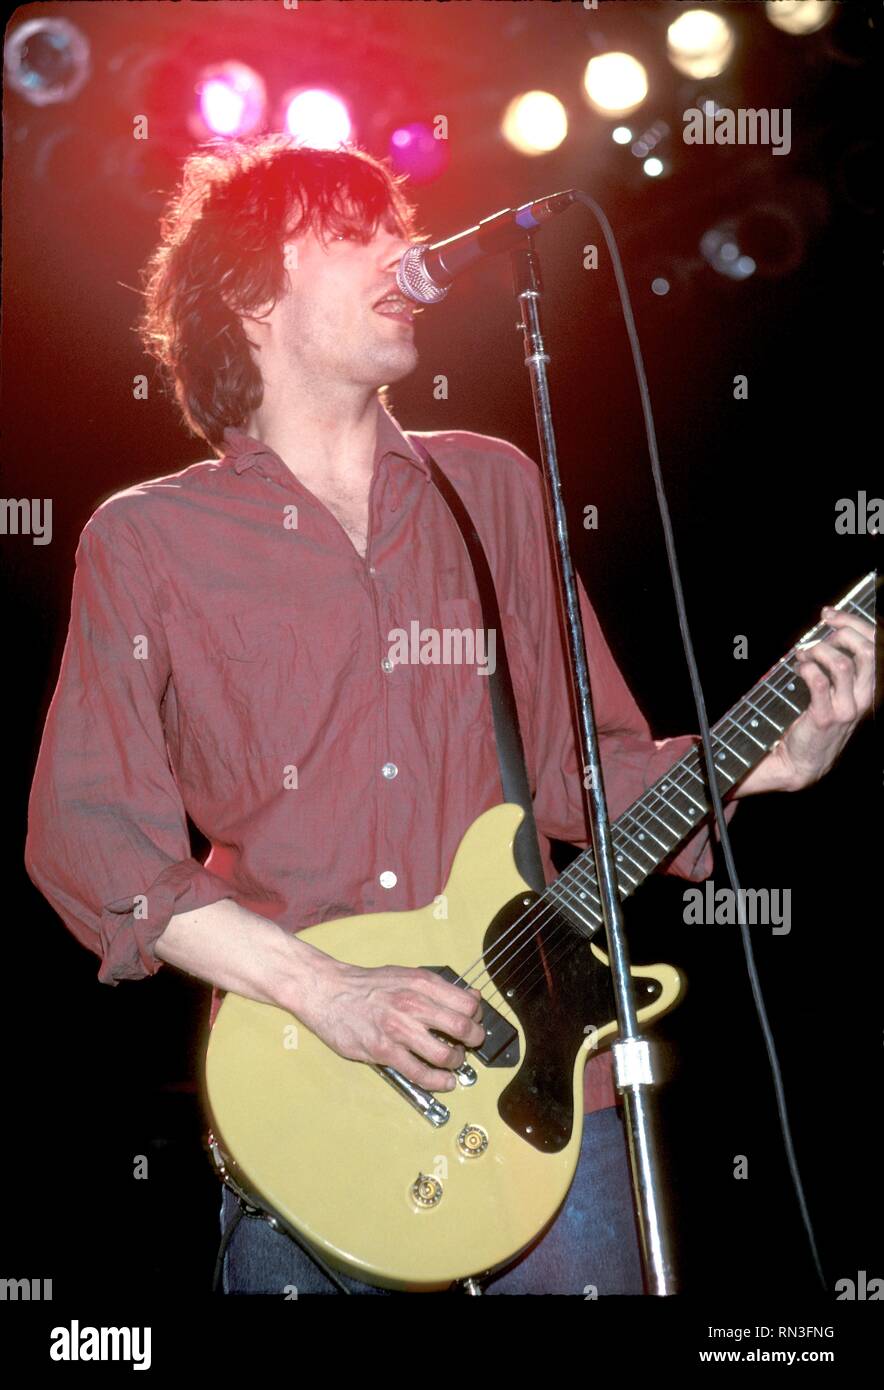 Singer, songwriter and guitarist Paul Westerberg of the rick band The